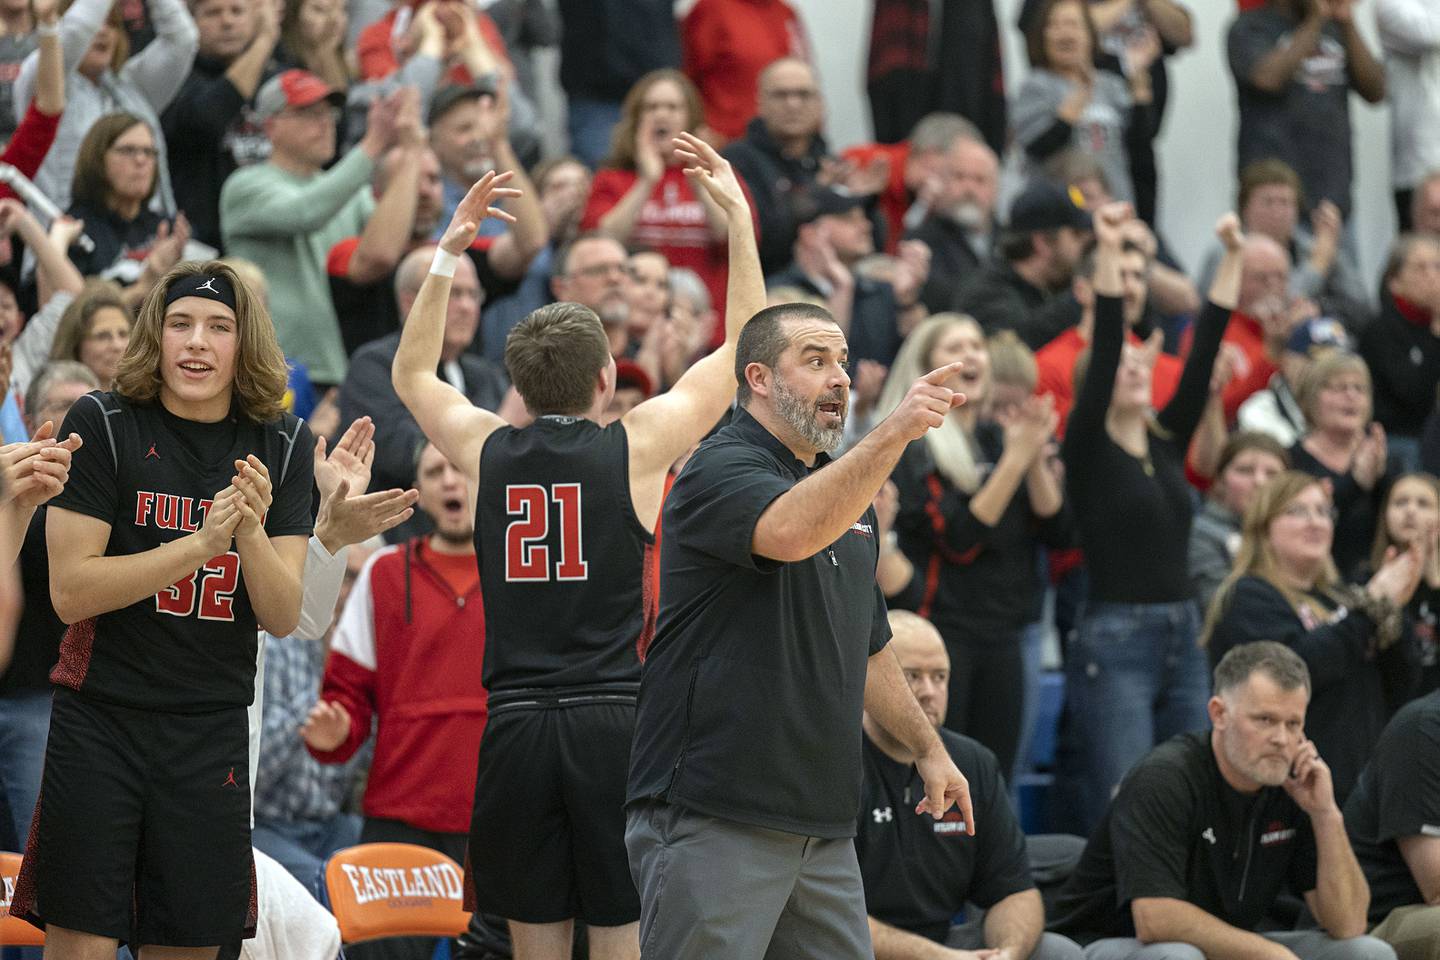 Fulton coach RJ Coffey works the sidelines during the Steamer’s win over Pecatonica Tuesday, Feb. 28, 2023 in the Eastland 1A sectional semifinal.